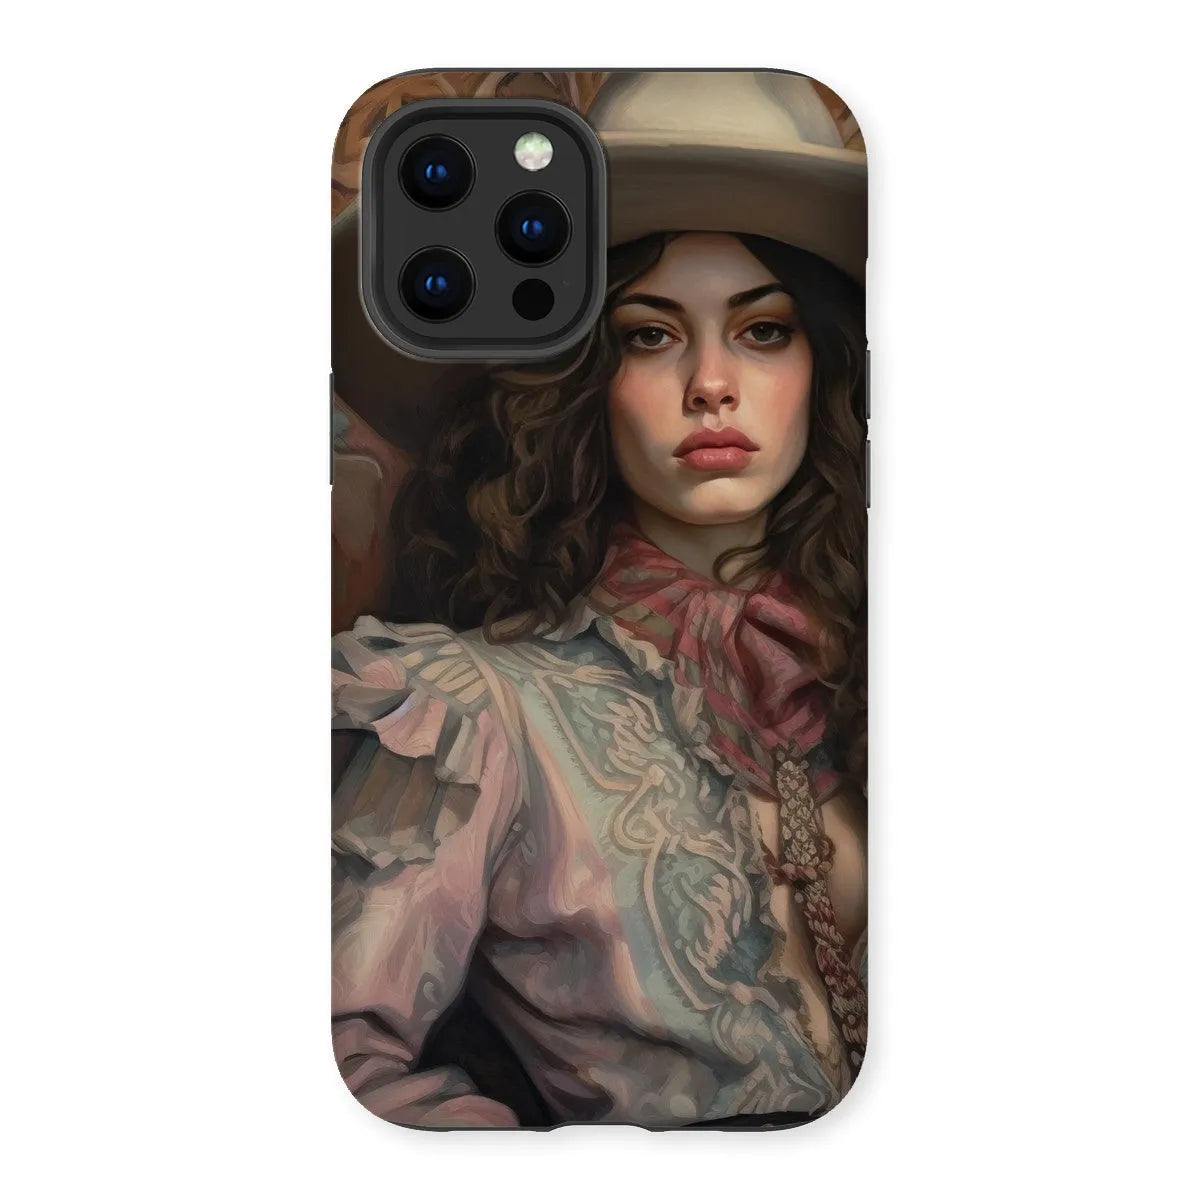 Alex The Lesbian Cowgirl - Sapphic Art Phone Case - Iphone 12 Pro Max / Matte - Mobile Phone Cases - Aesthetic Art